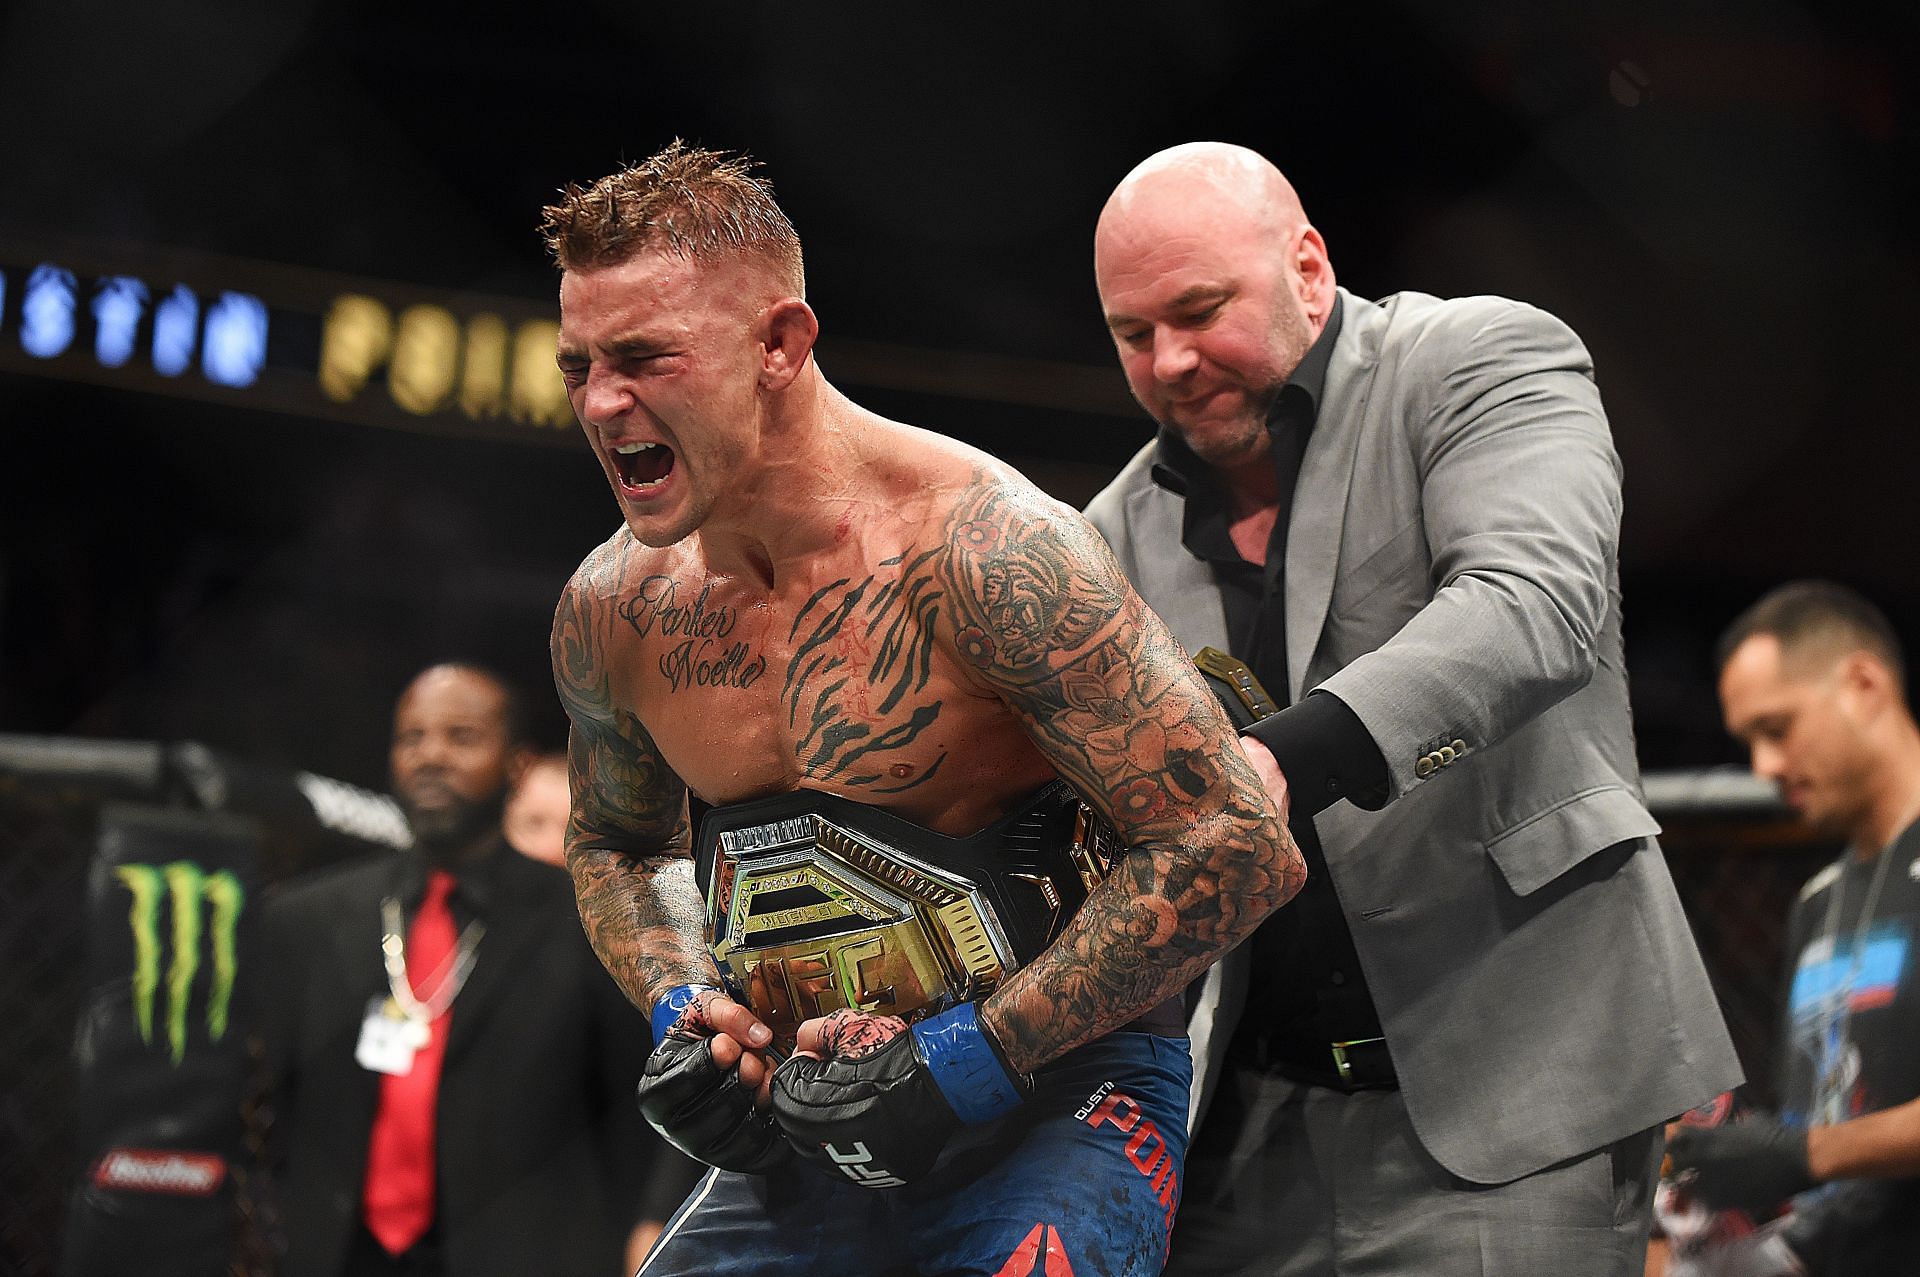 Who did Dustin Poirier lose his belt to?